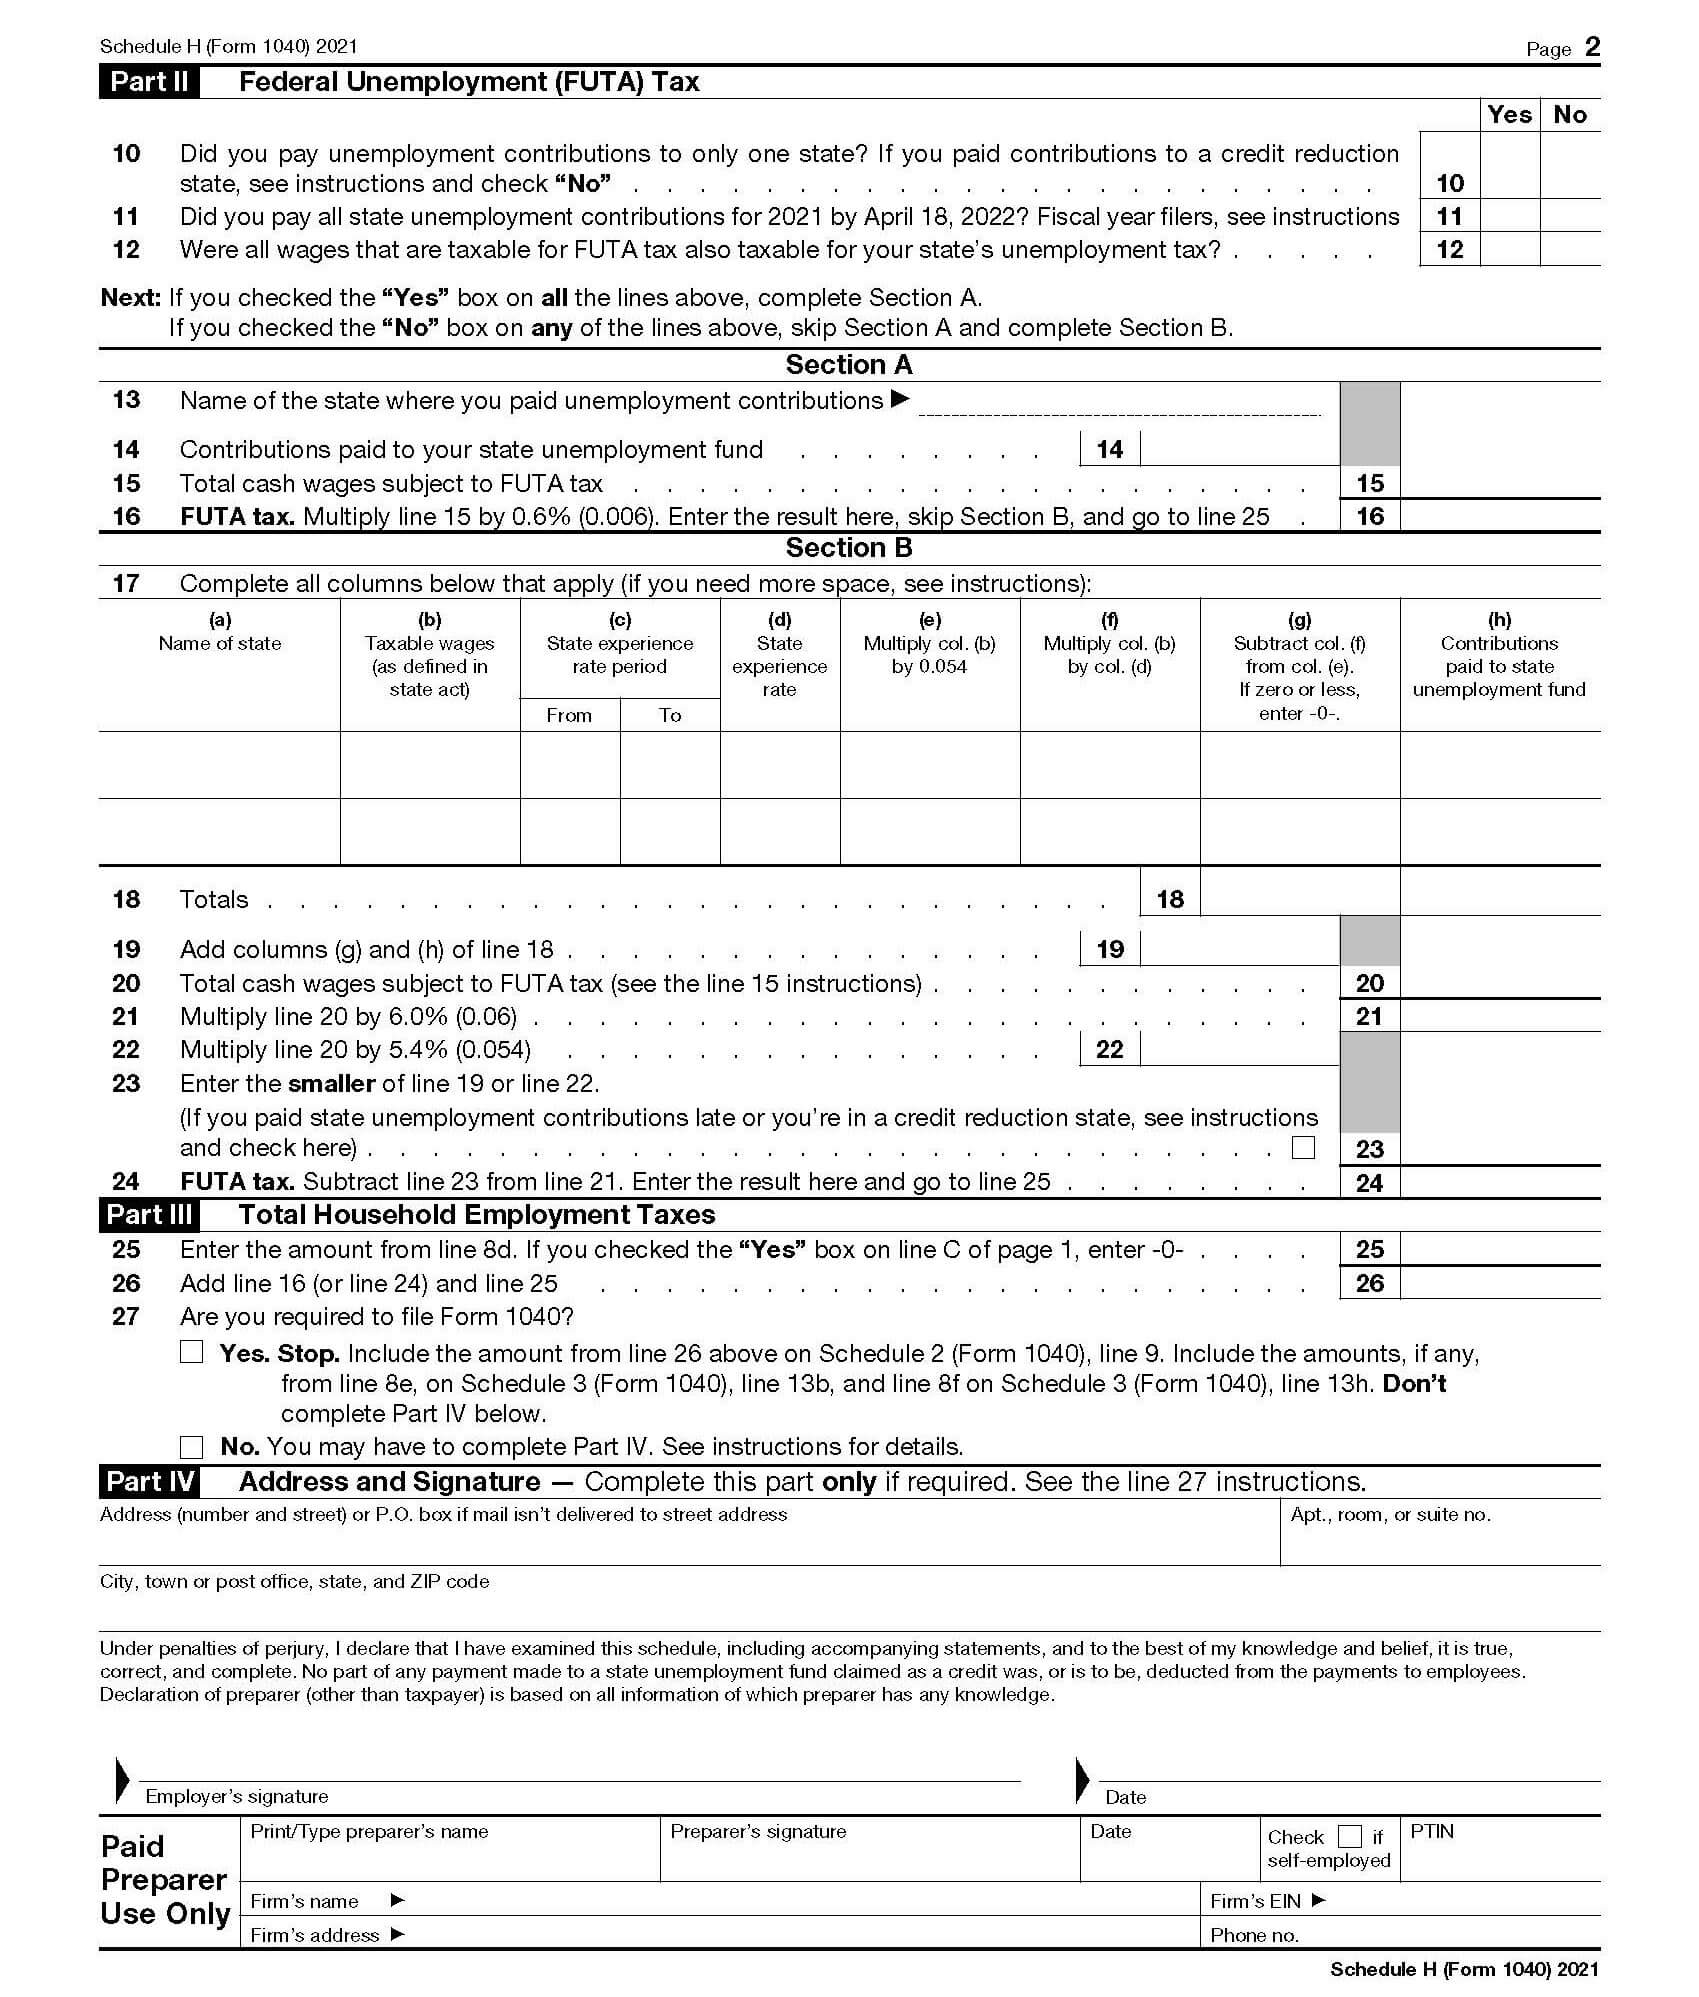 irs schedule-h part 2 example